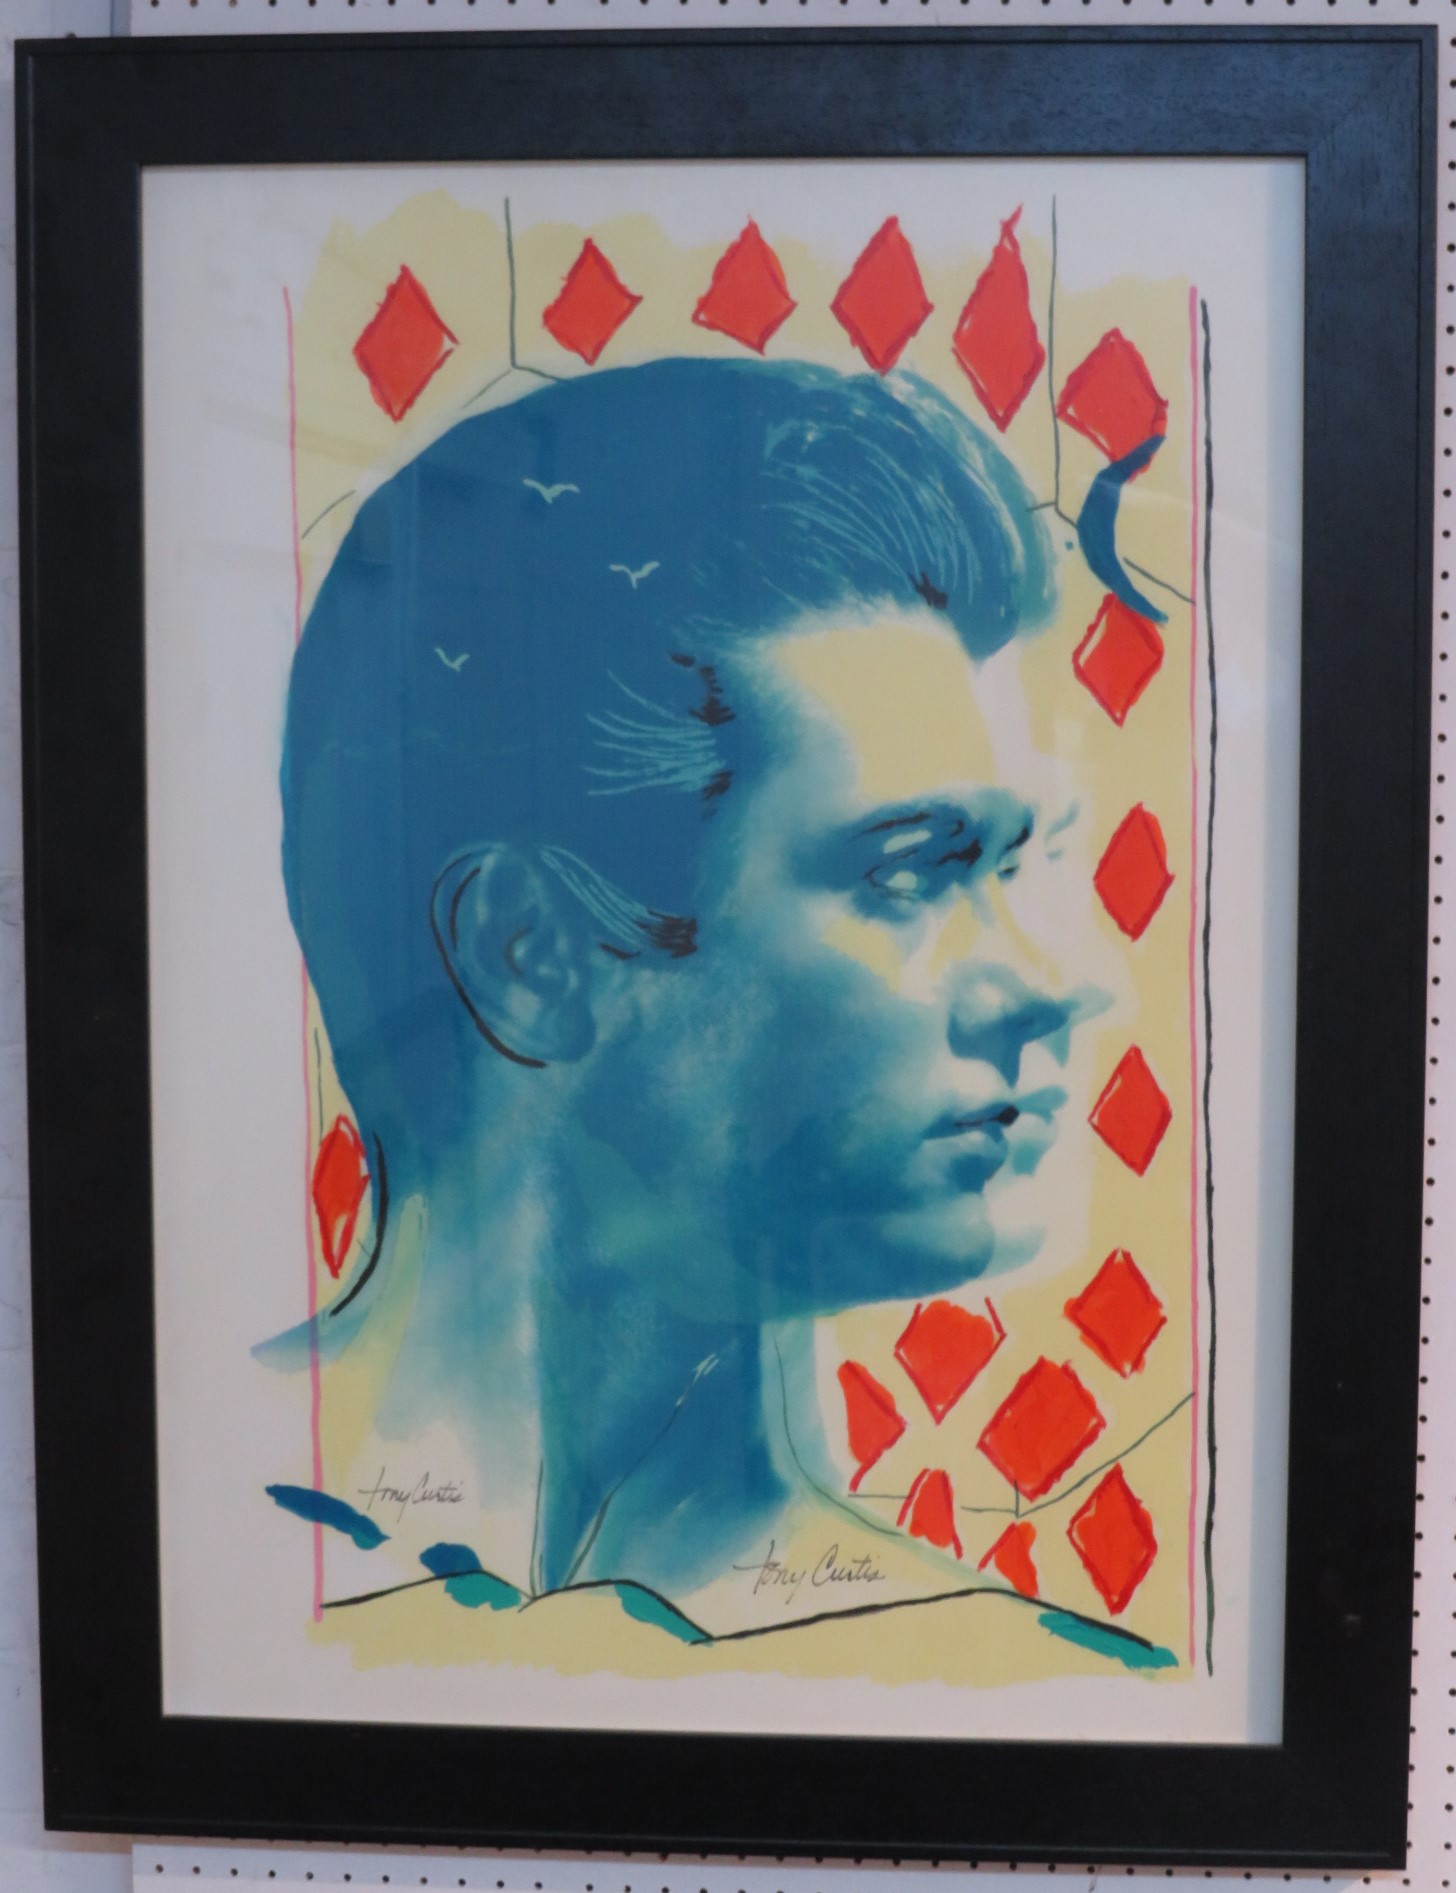 After Tony Curtis (1925-2010) - 'Gypsy Prince', colour print with hand-painted embellishments, - Image 2 of 7